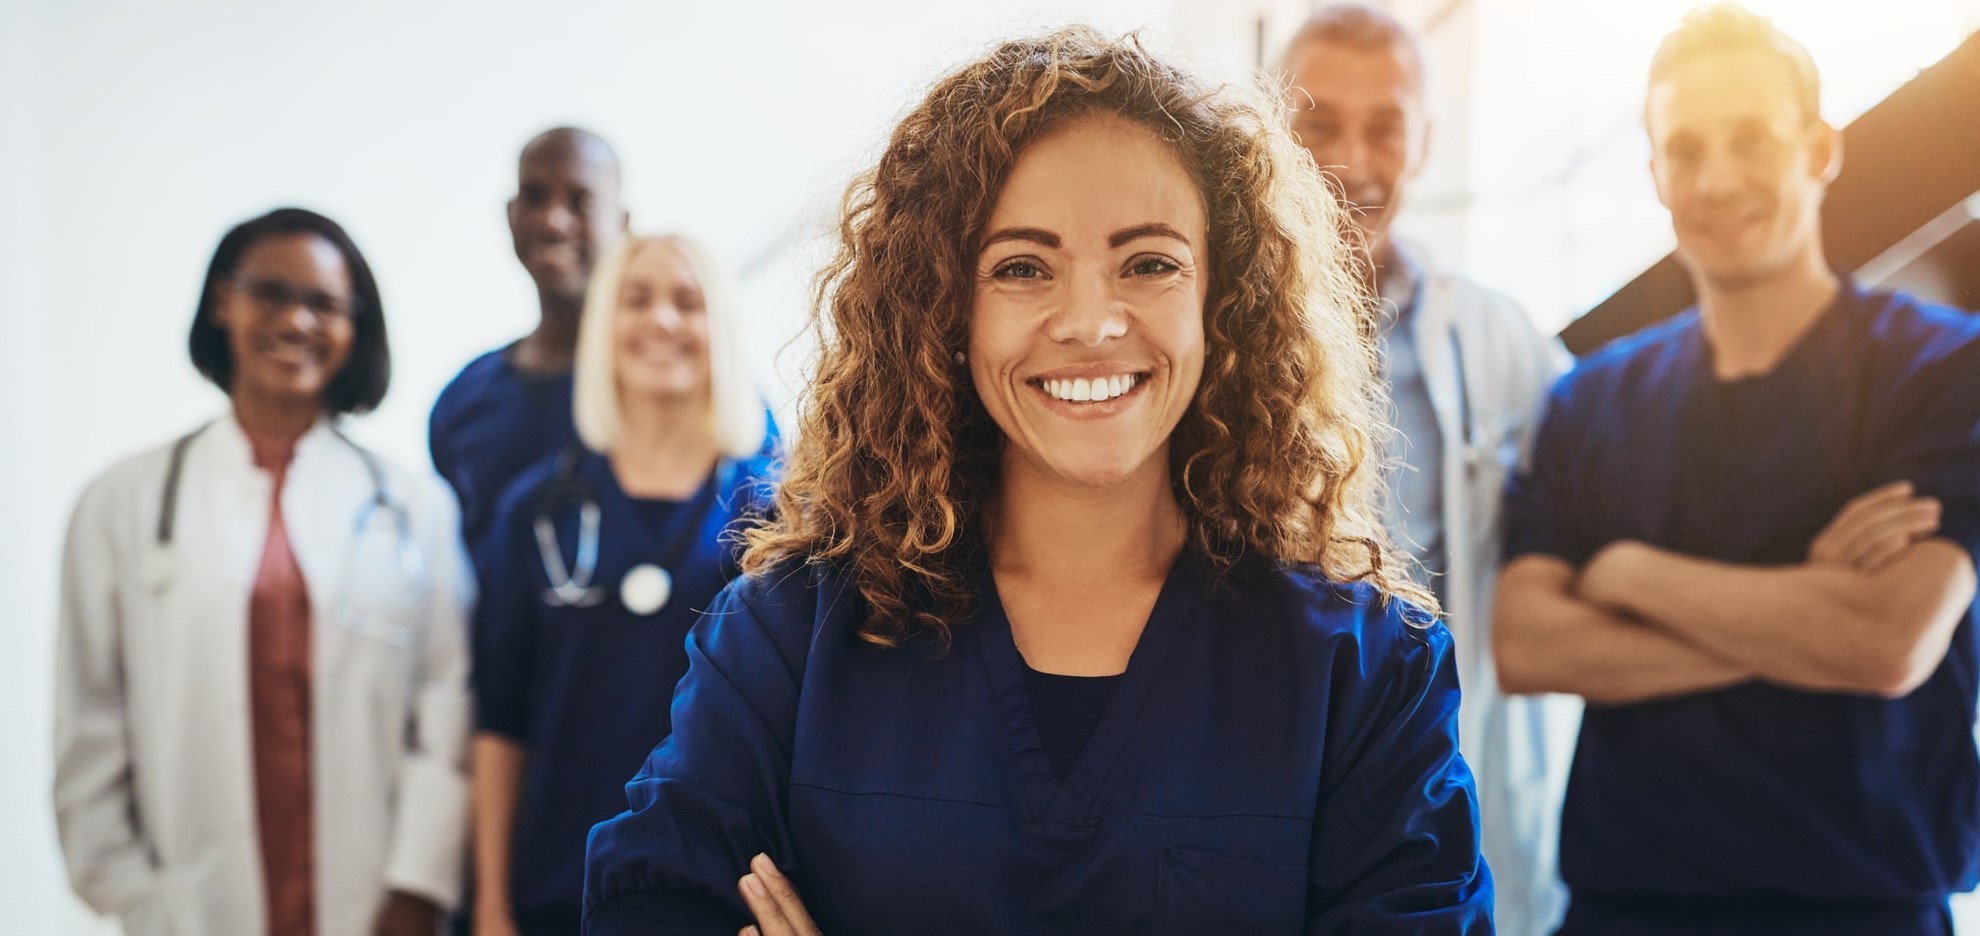 group of smiling healthcare workers